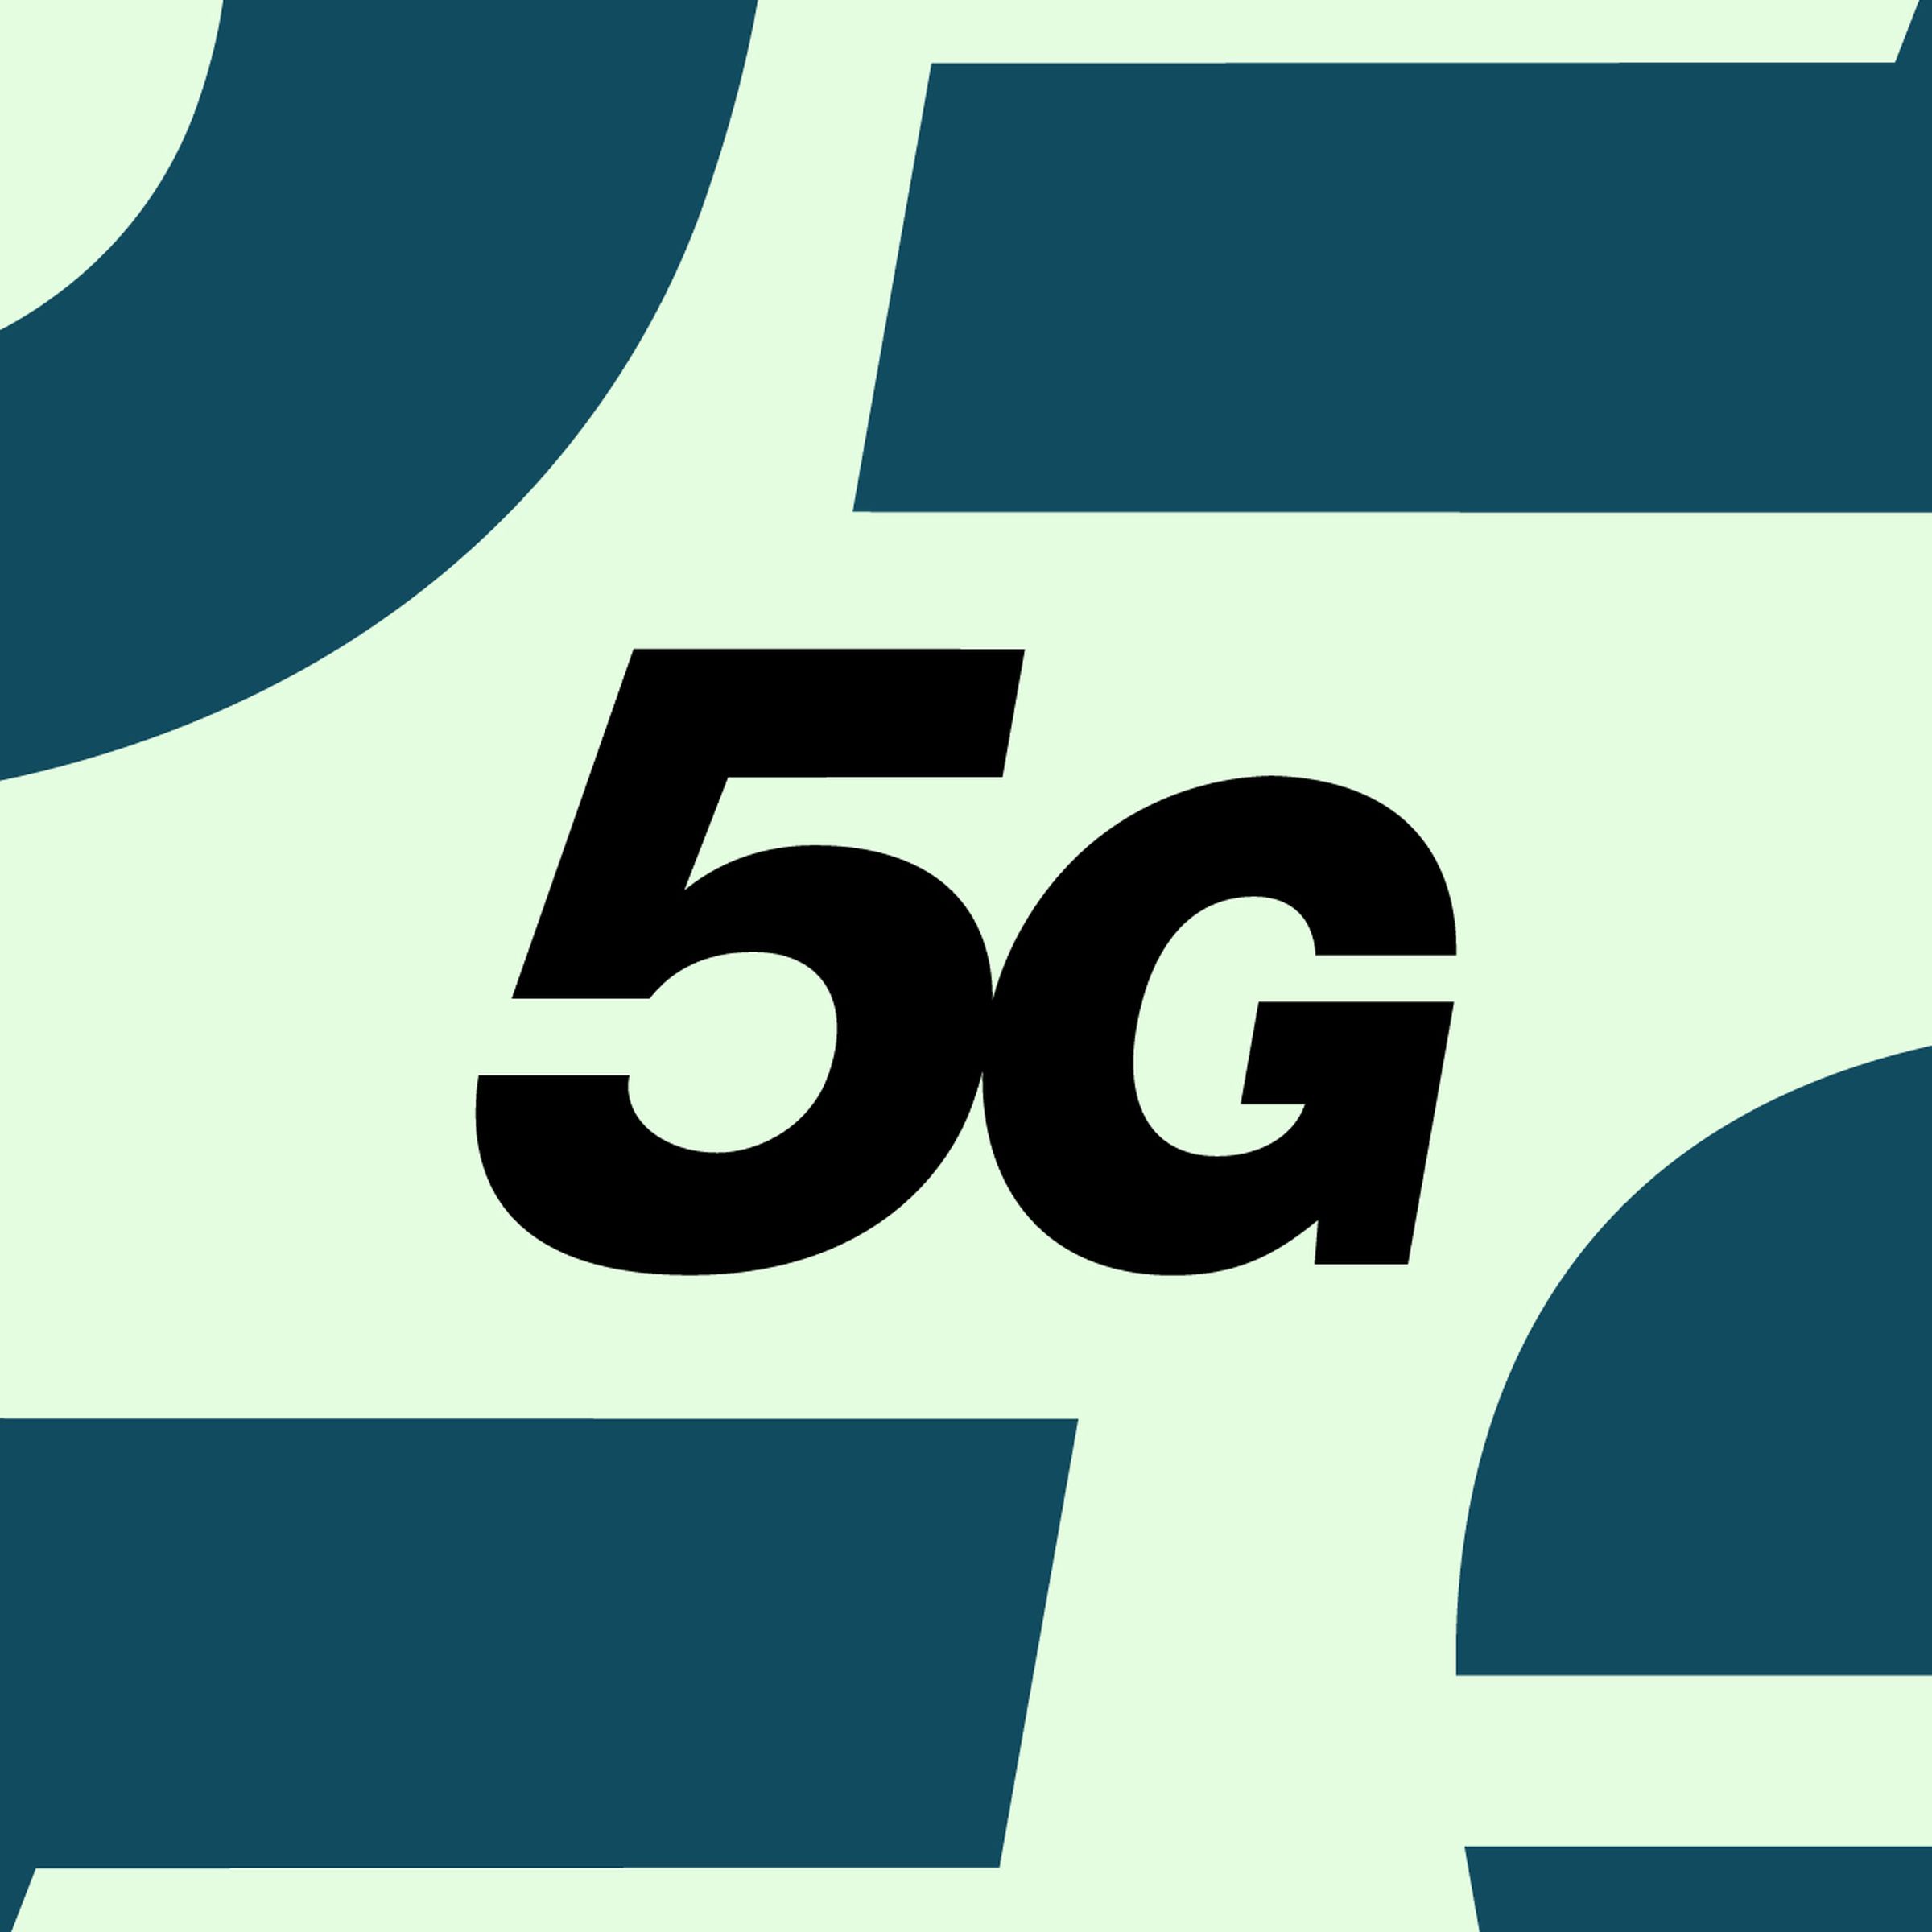 5G logo on an illustrated blue and green background.